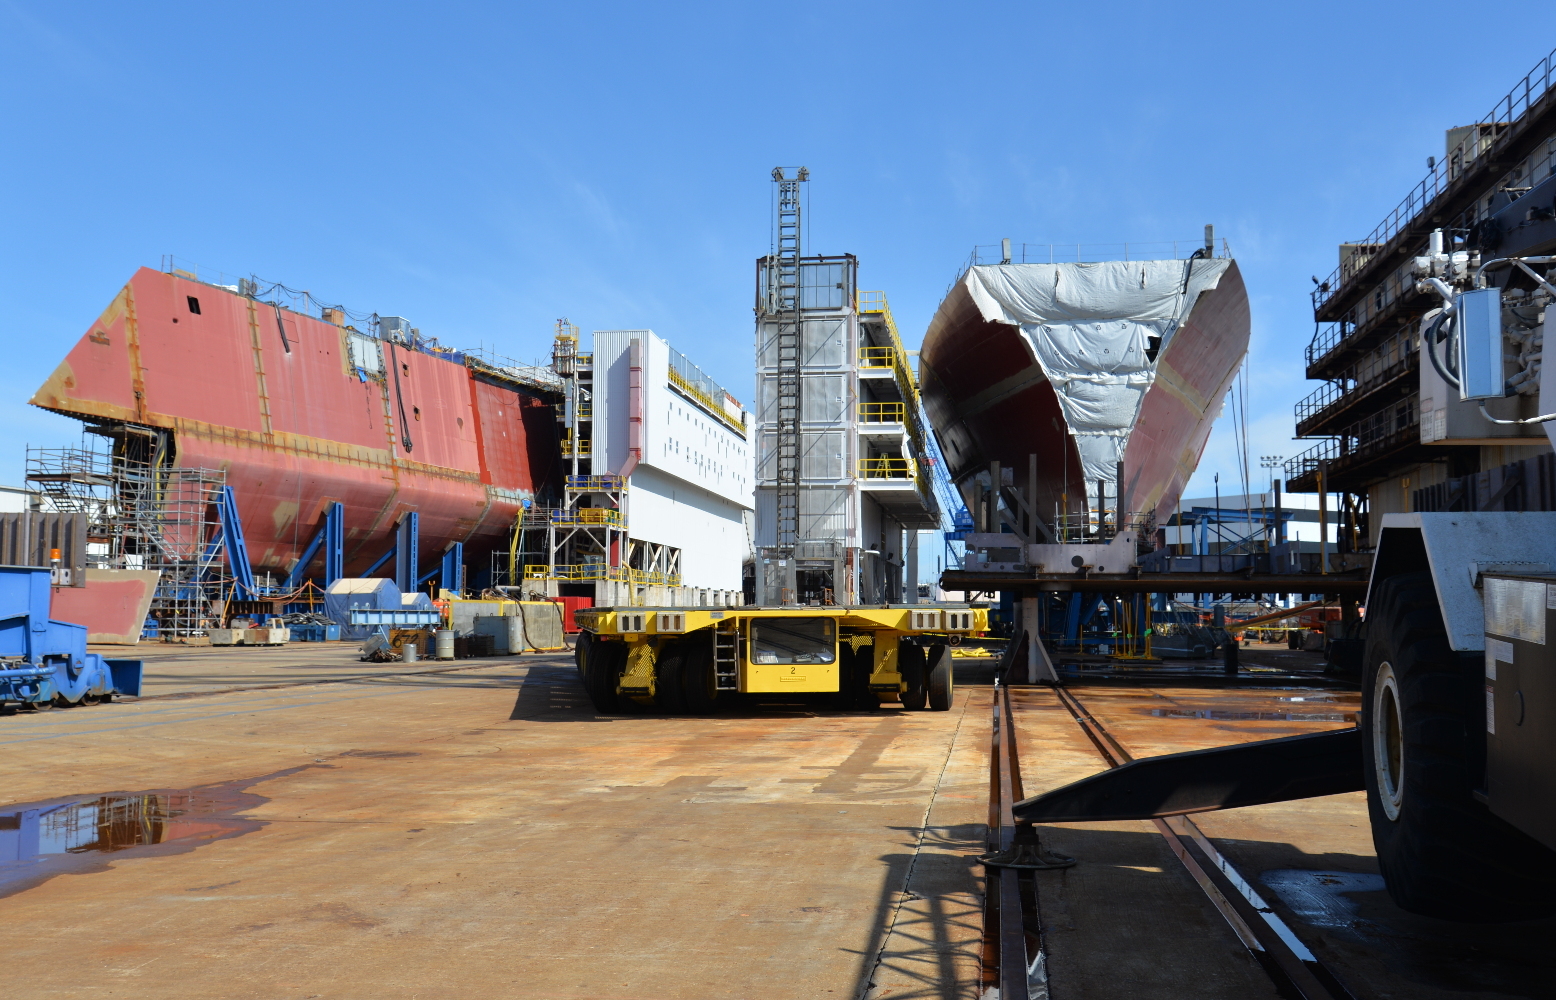 At left, the hull of the second ship in the class, the Michael Monsoor (DDG 1001), is coming together. At right is the Rafael Peralta (DDG 115), first of the latest batch of Arleigh Burke DDG 51-class destroyers under construction at Bath. Similar ships are built in Mississippi at Ingalls Shipbuilding. 